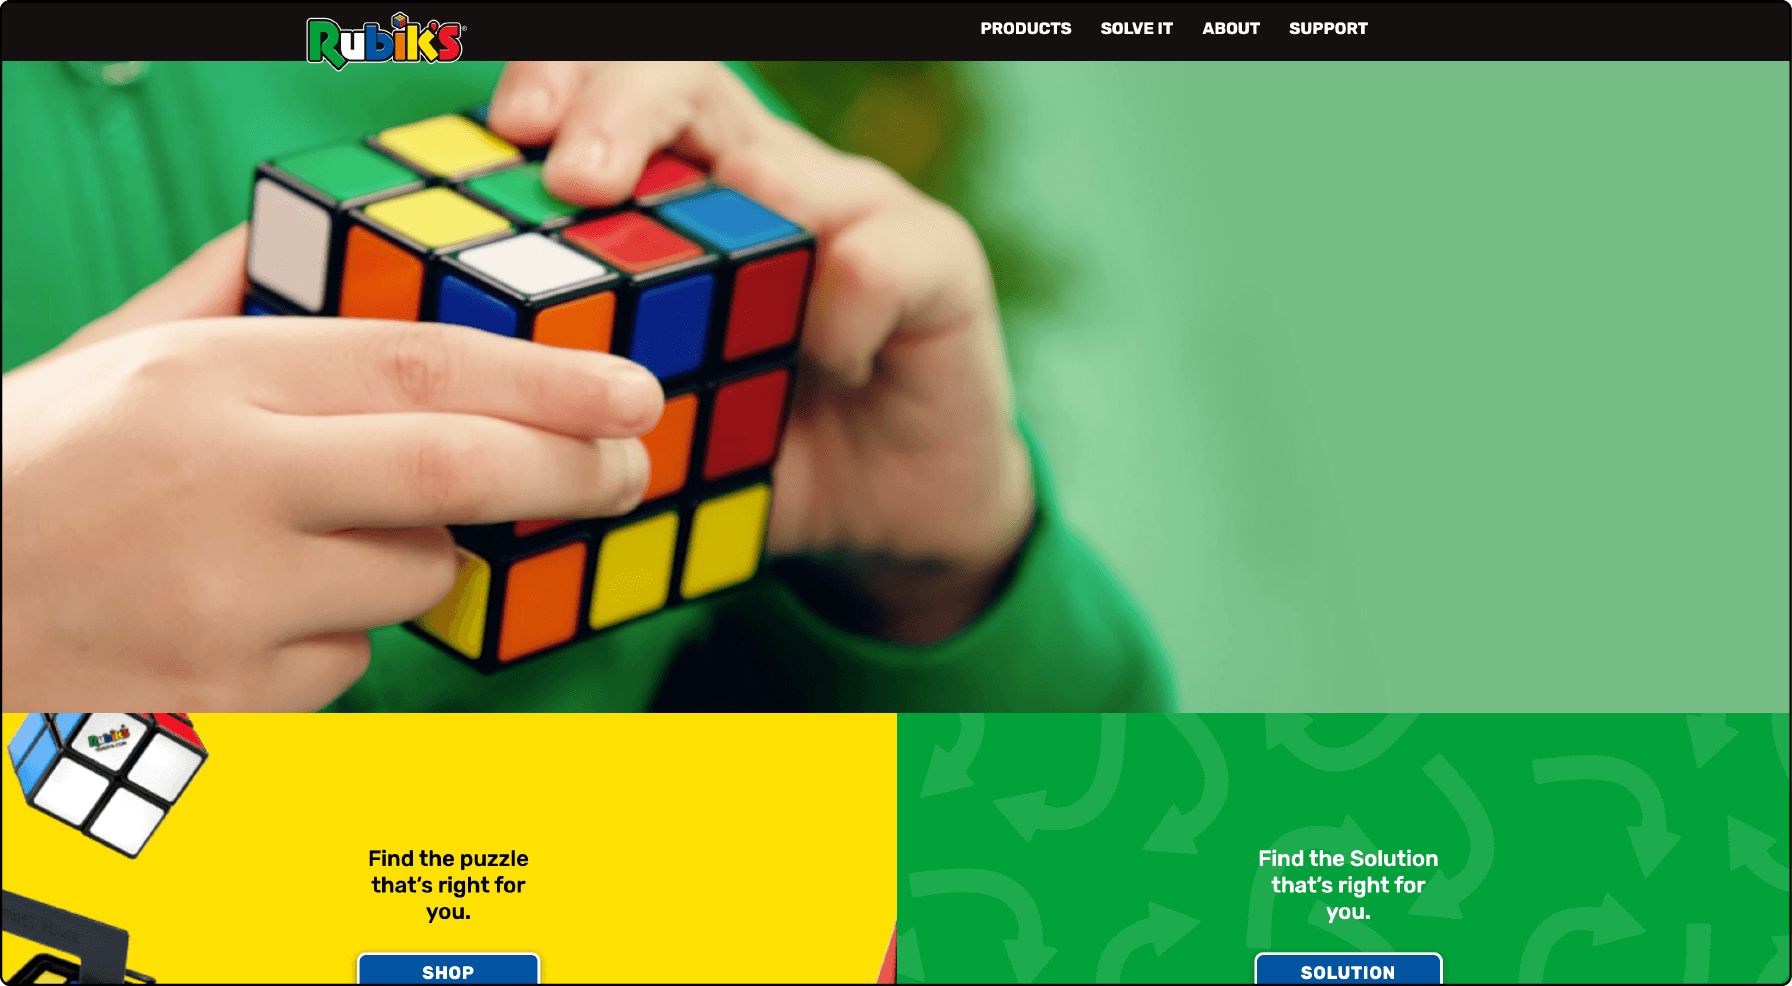 Rubik’s Cube Website Showcasing Headless Commerce Transformation and Features